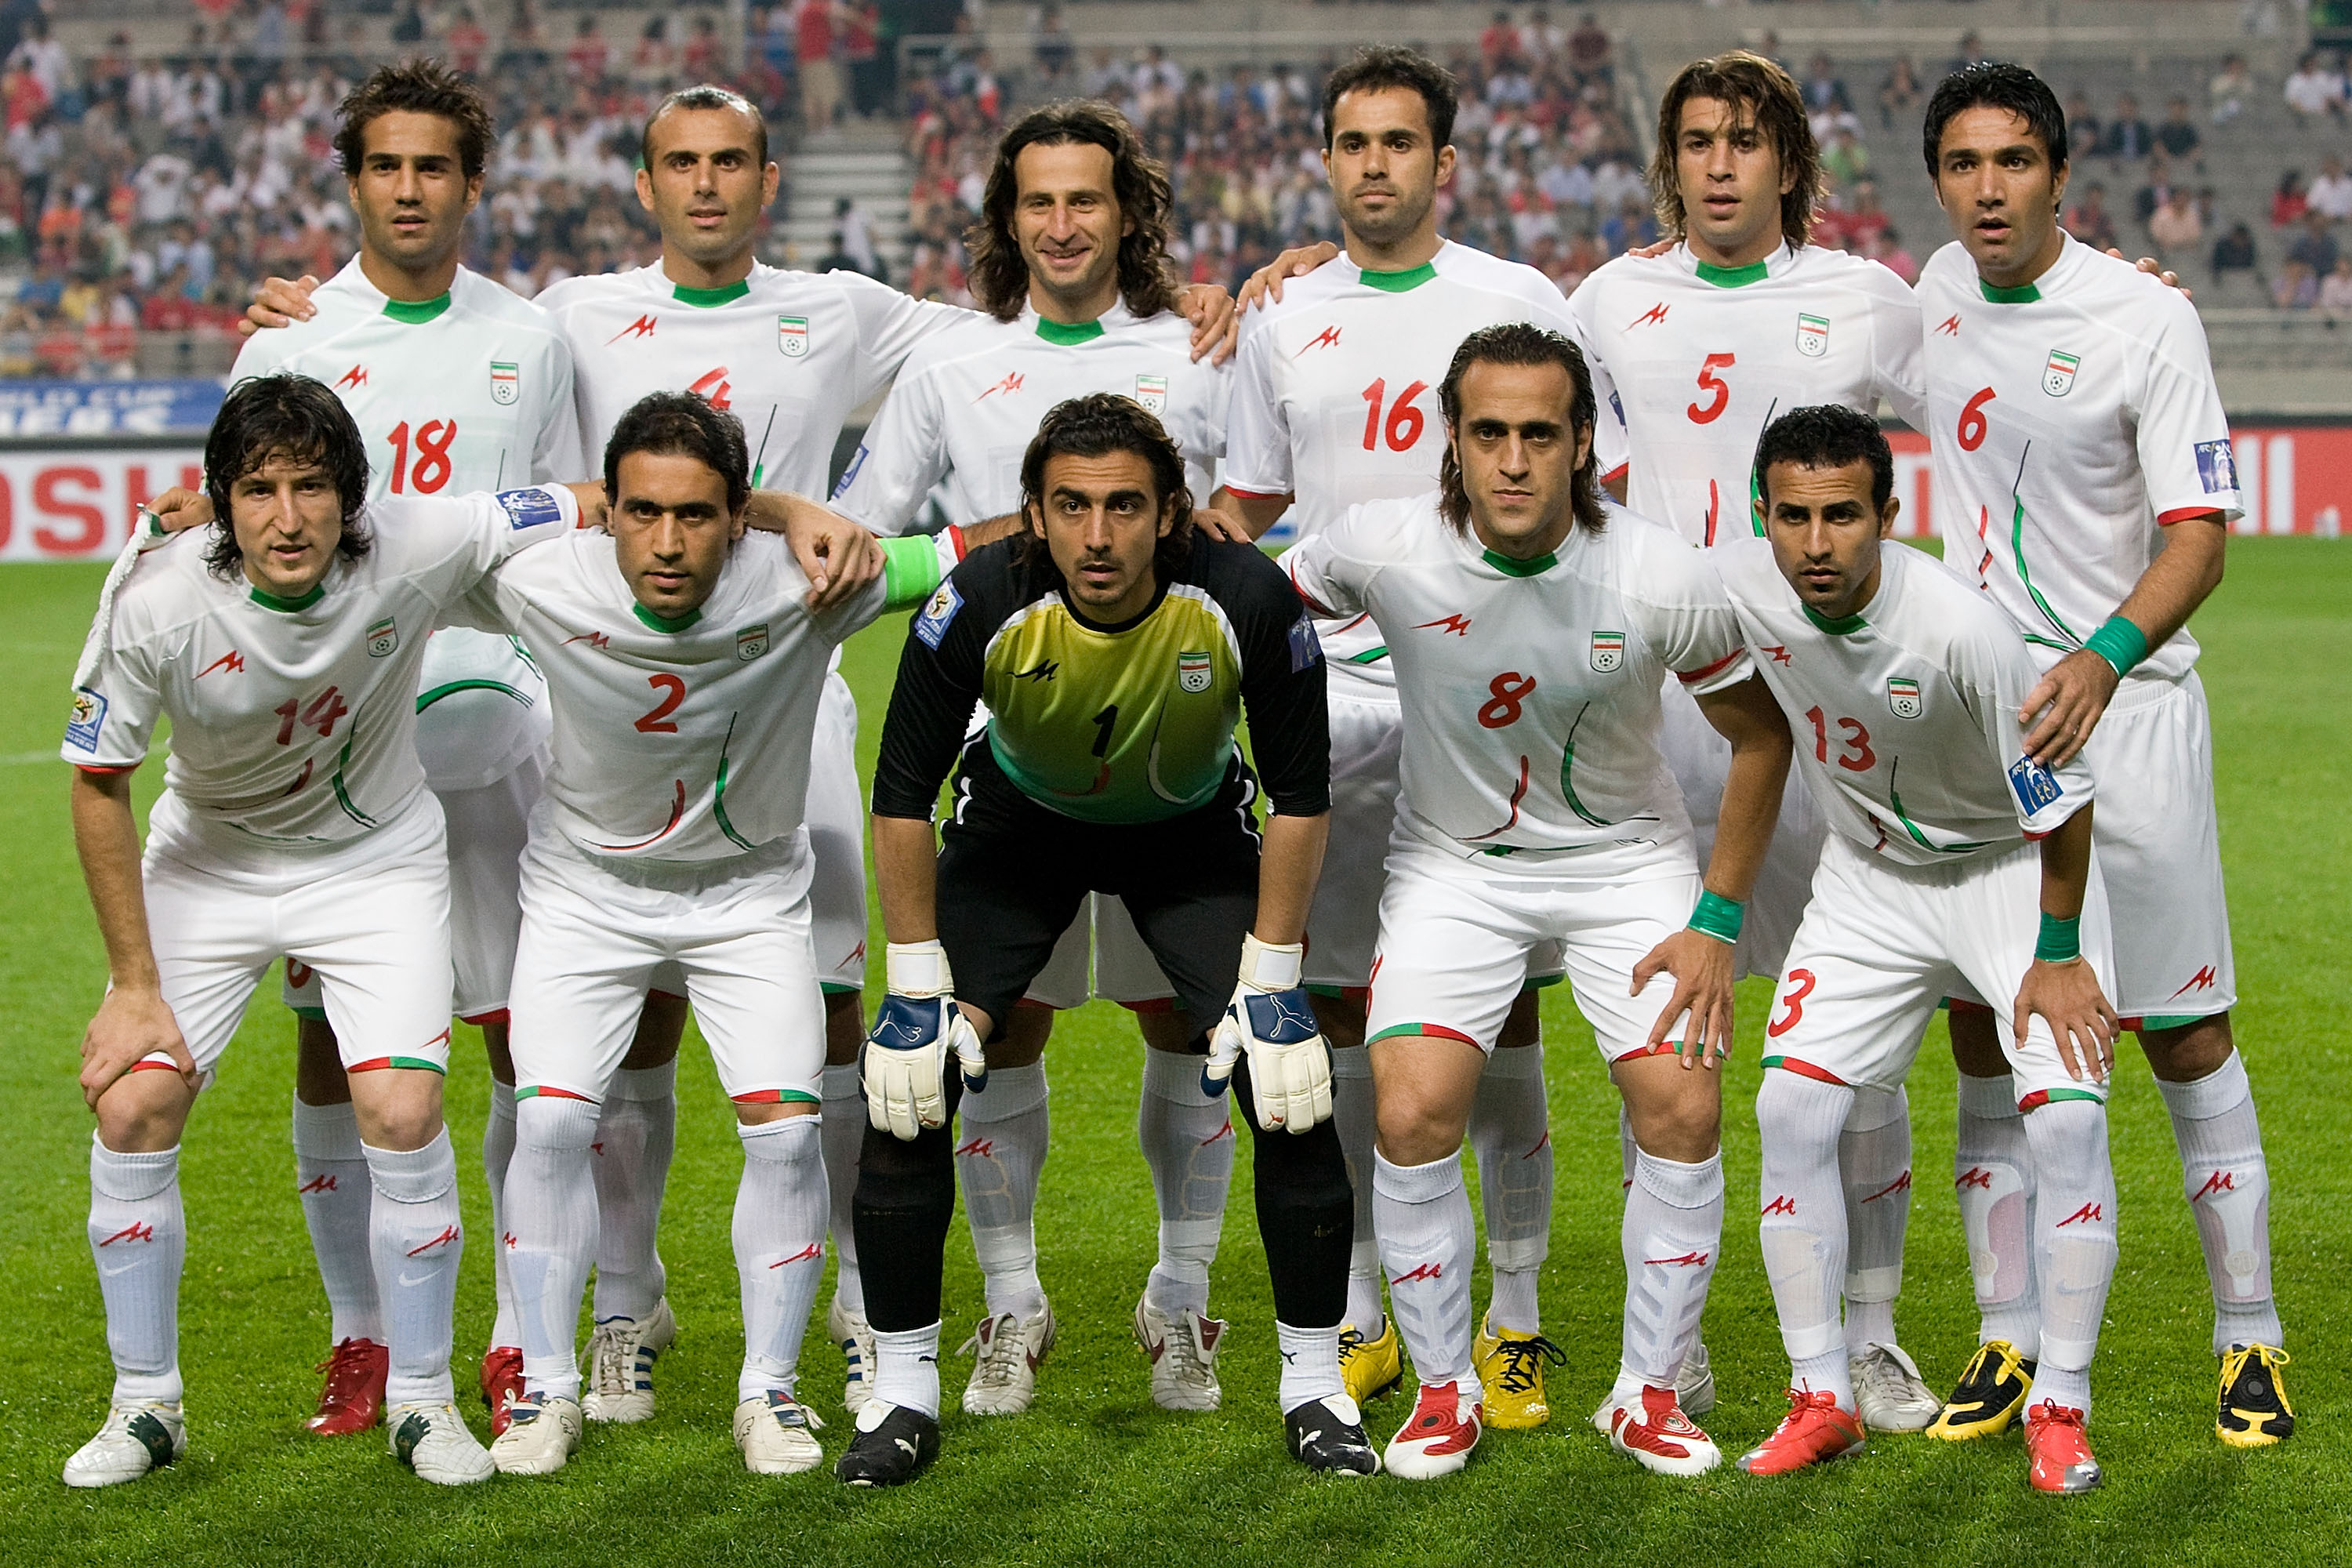 SEOUL, SOUTH KOREA - JUNE 17:  Iran's national team pose for a picture before the 2010 FIFA World Cup Asian Qualifiers match between Iran and South Korea at Seoul World Cup Stadium on June 17, 2009 in Seoul, South Korea.  (Photo by Han Myung-Gu/Getty Imag